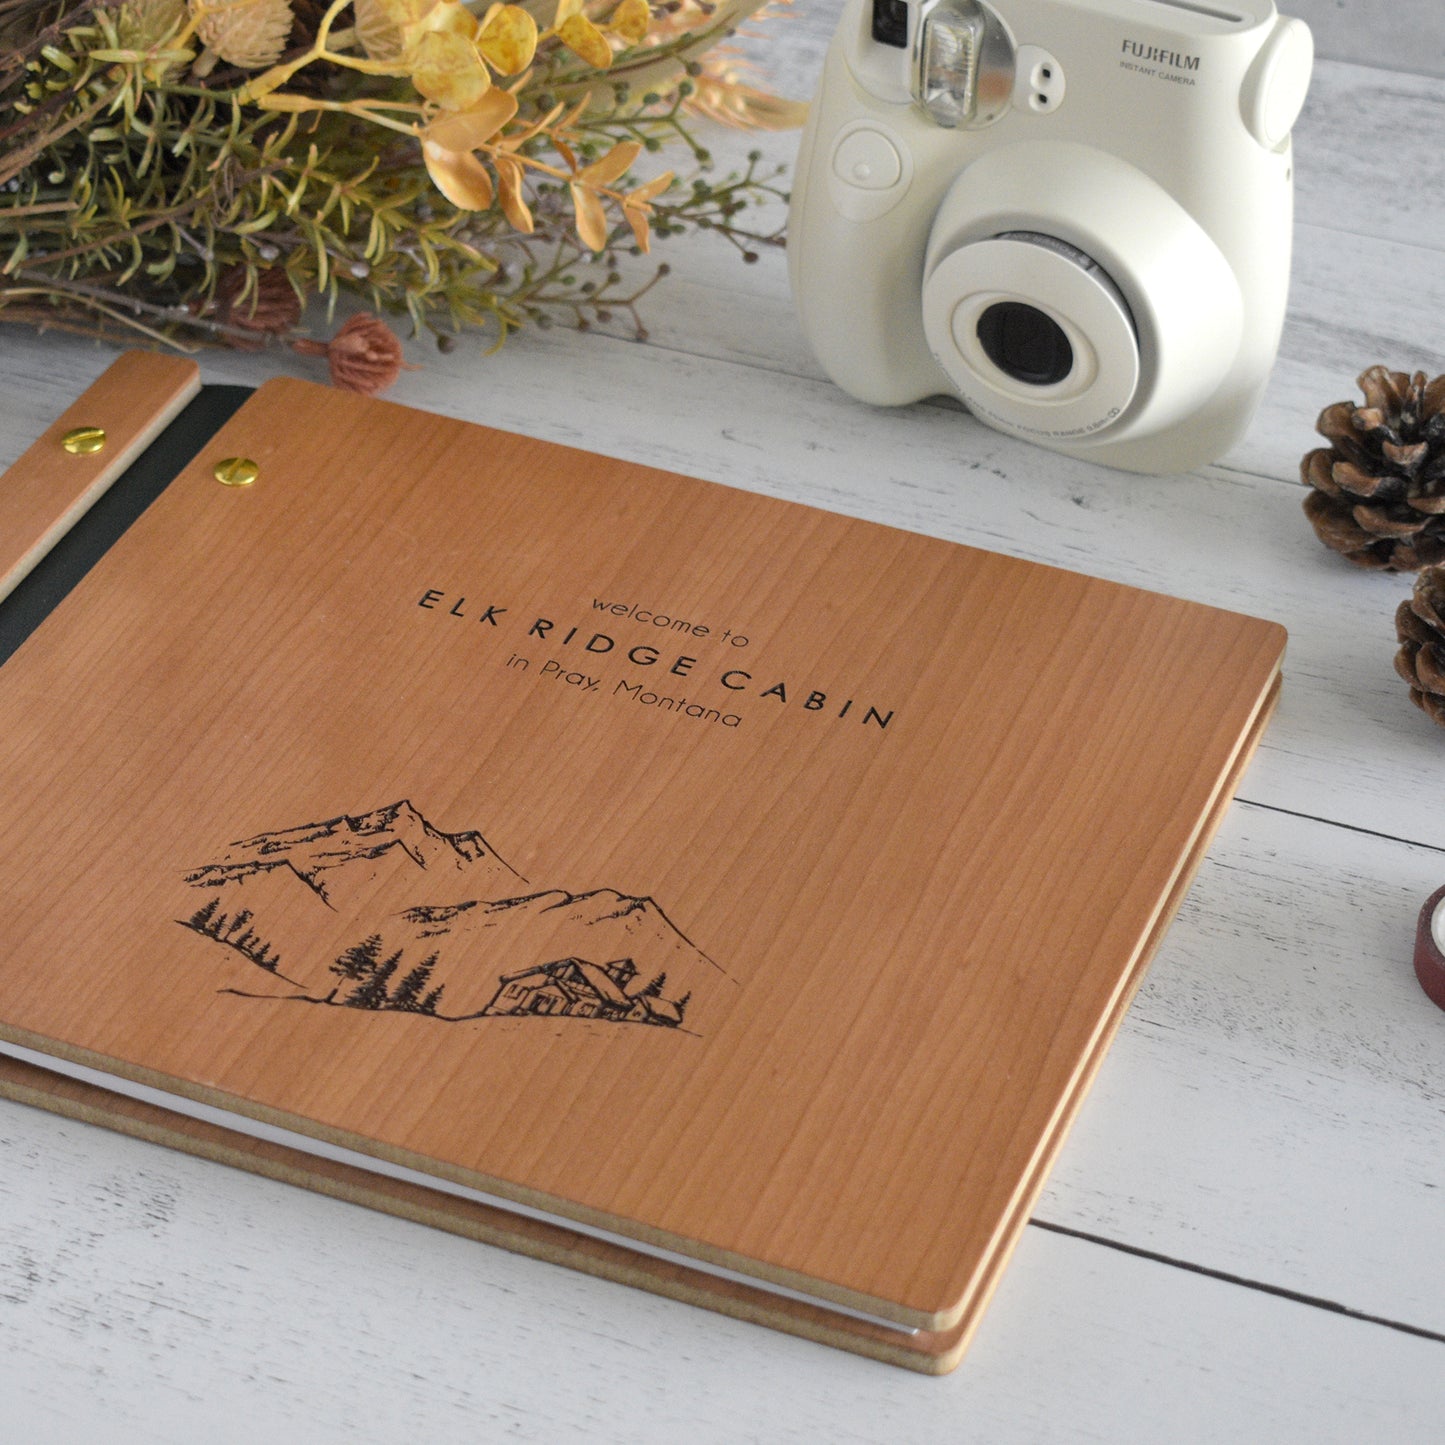 An 8.5x11" Airbnb guest book lies on a table. Made of cherry wood, black vegan leather binding, and gold hardware. The front cover reads Welcome to Elk Ridge Cabin in Pray, Montana.